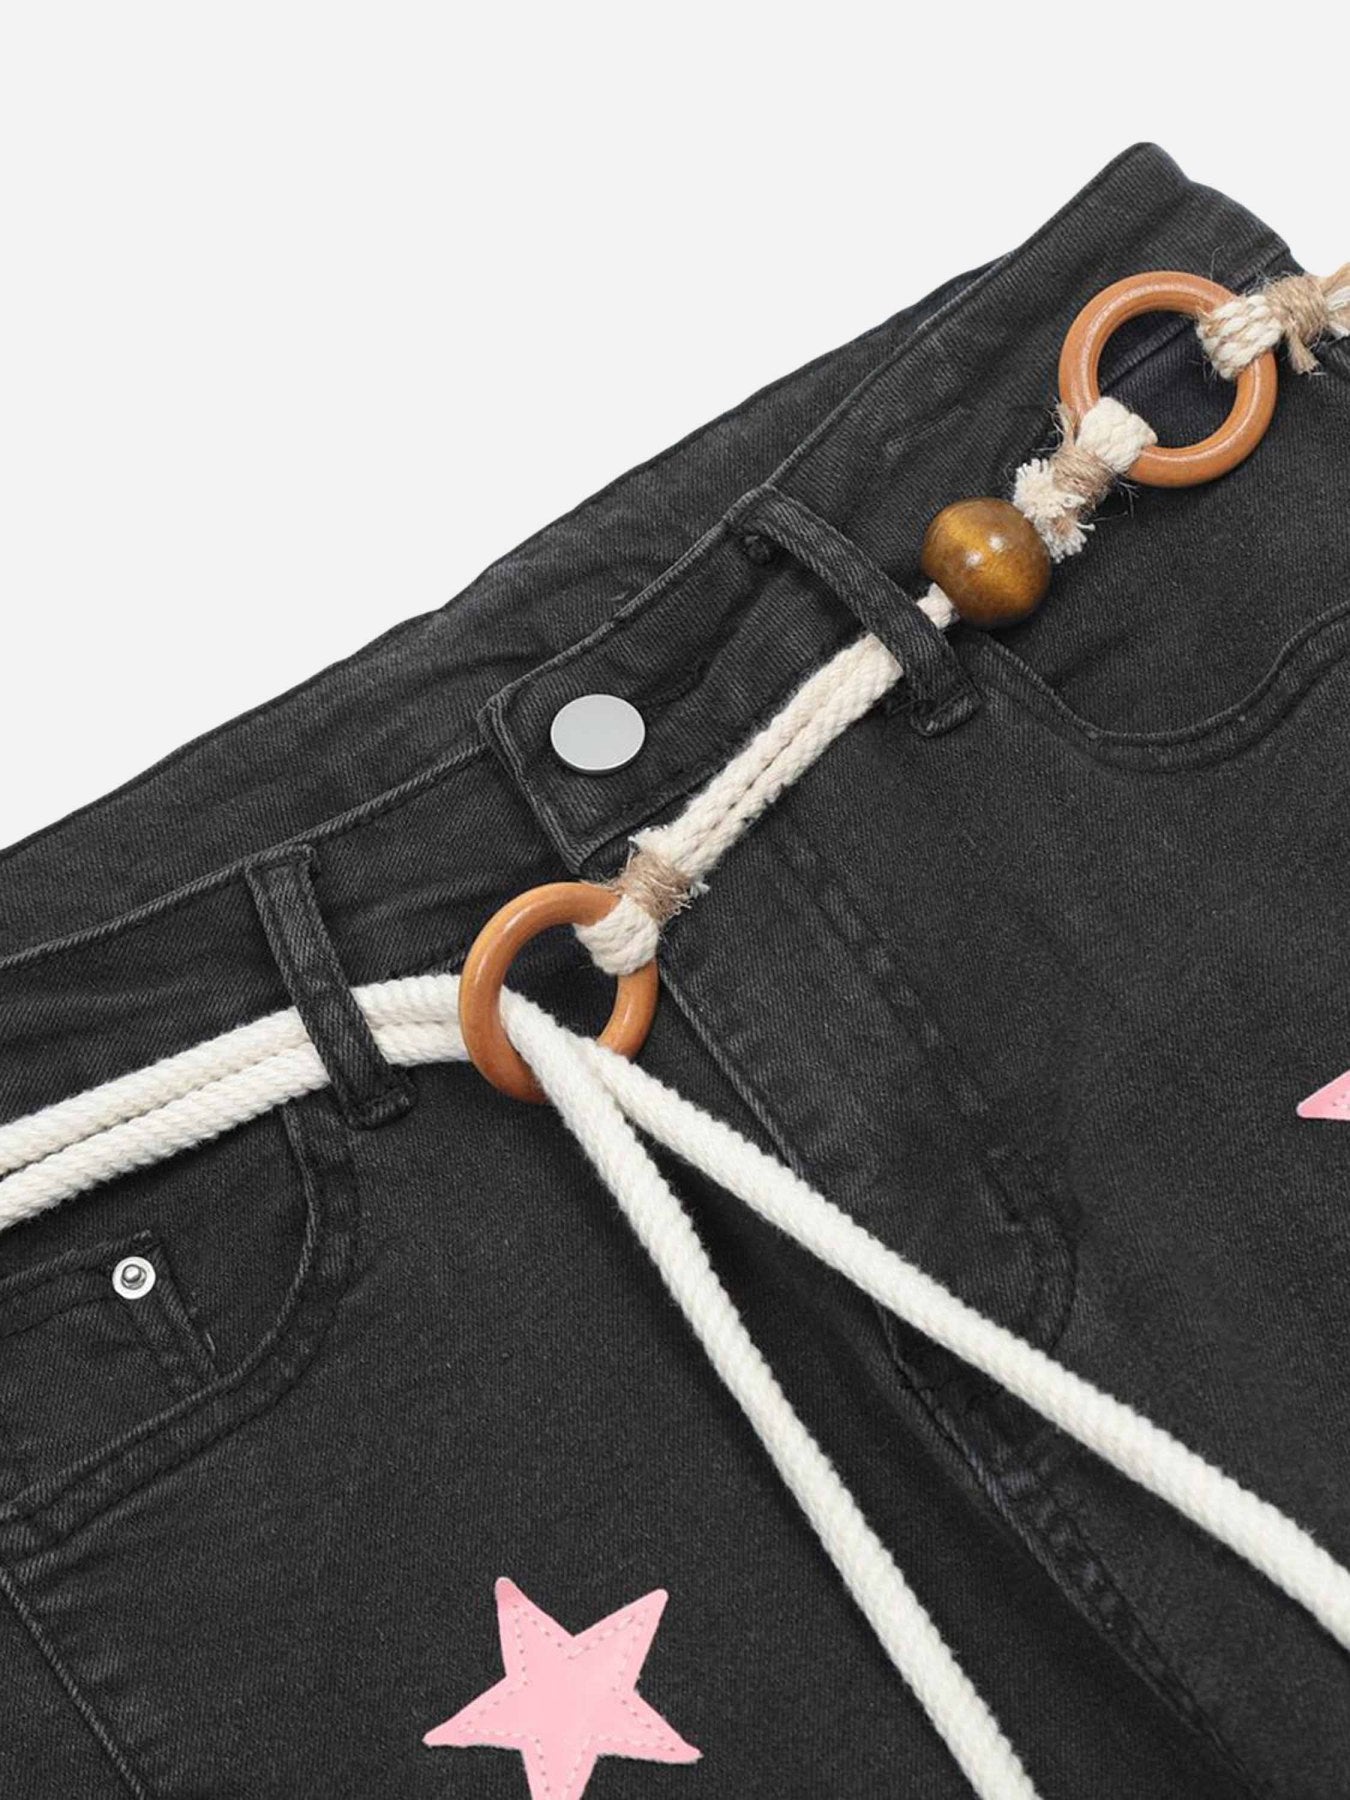 The Supermade Loose Casual Sexy Female Jeans